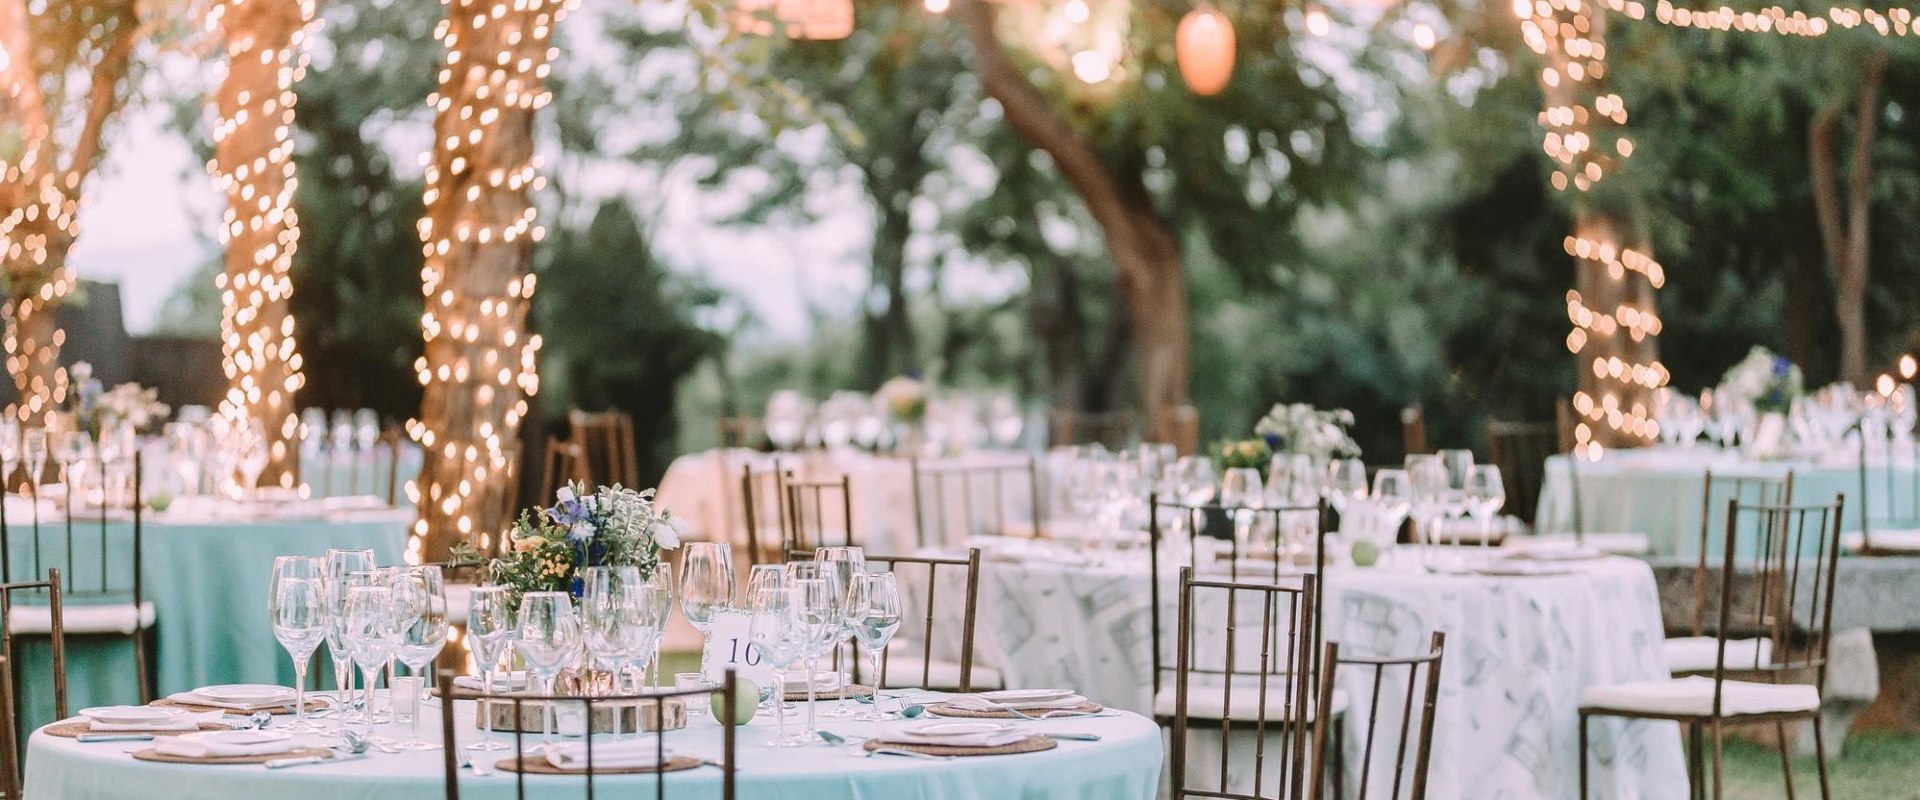 Wedding Catering Packages: A Comprehensive Guide to Choosing the Right Supplier